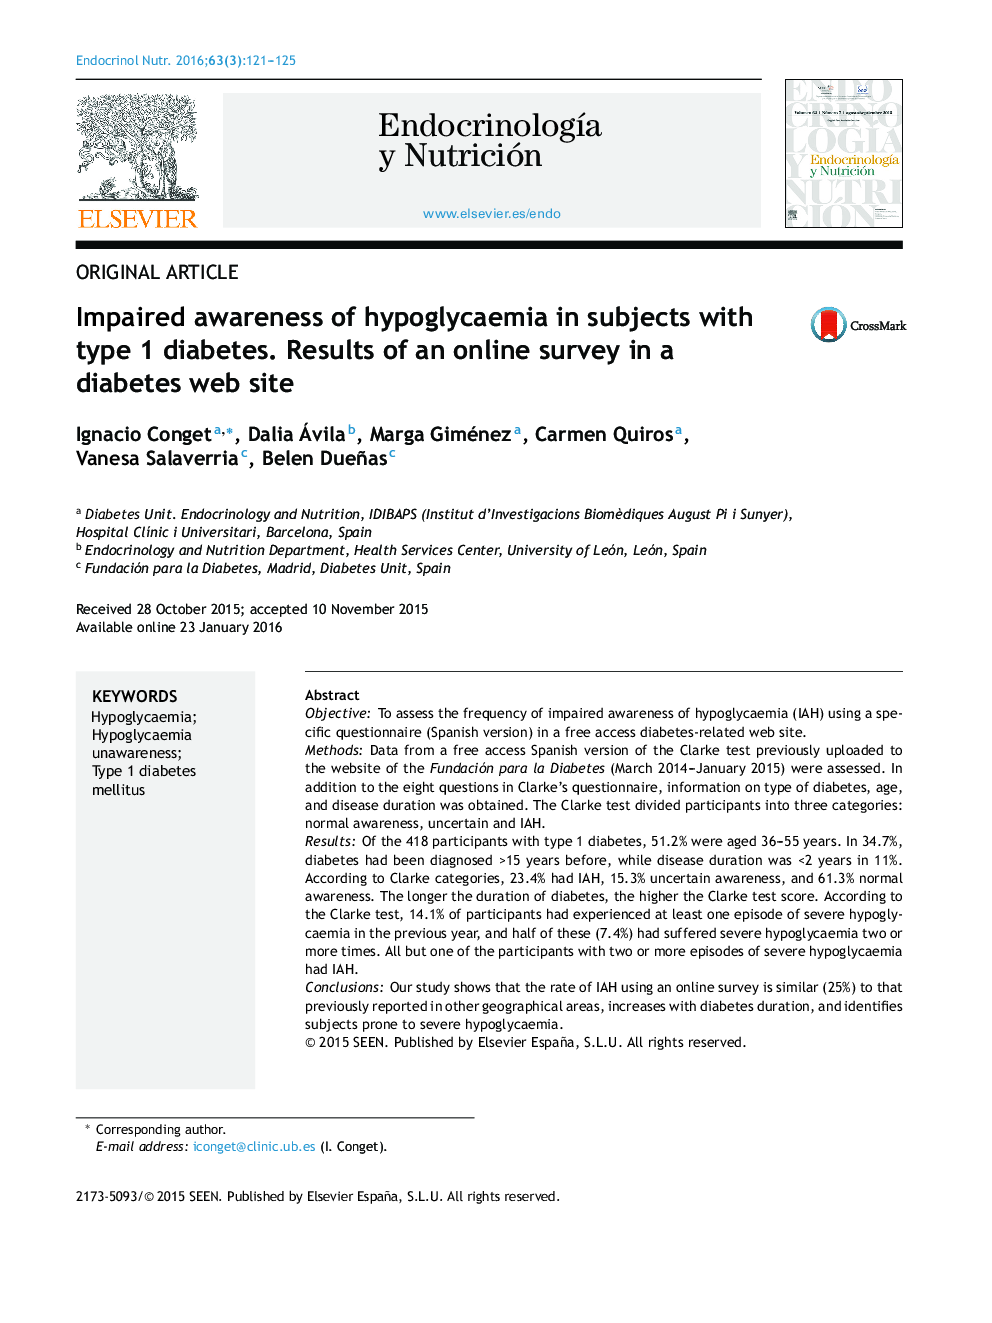 Impaired awareness of hypoglycaemia in subjects with type 1 diabetes. Results of an online survey in a diabetes web site